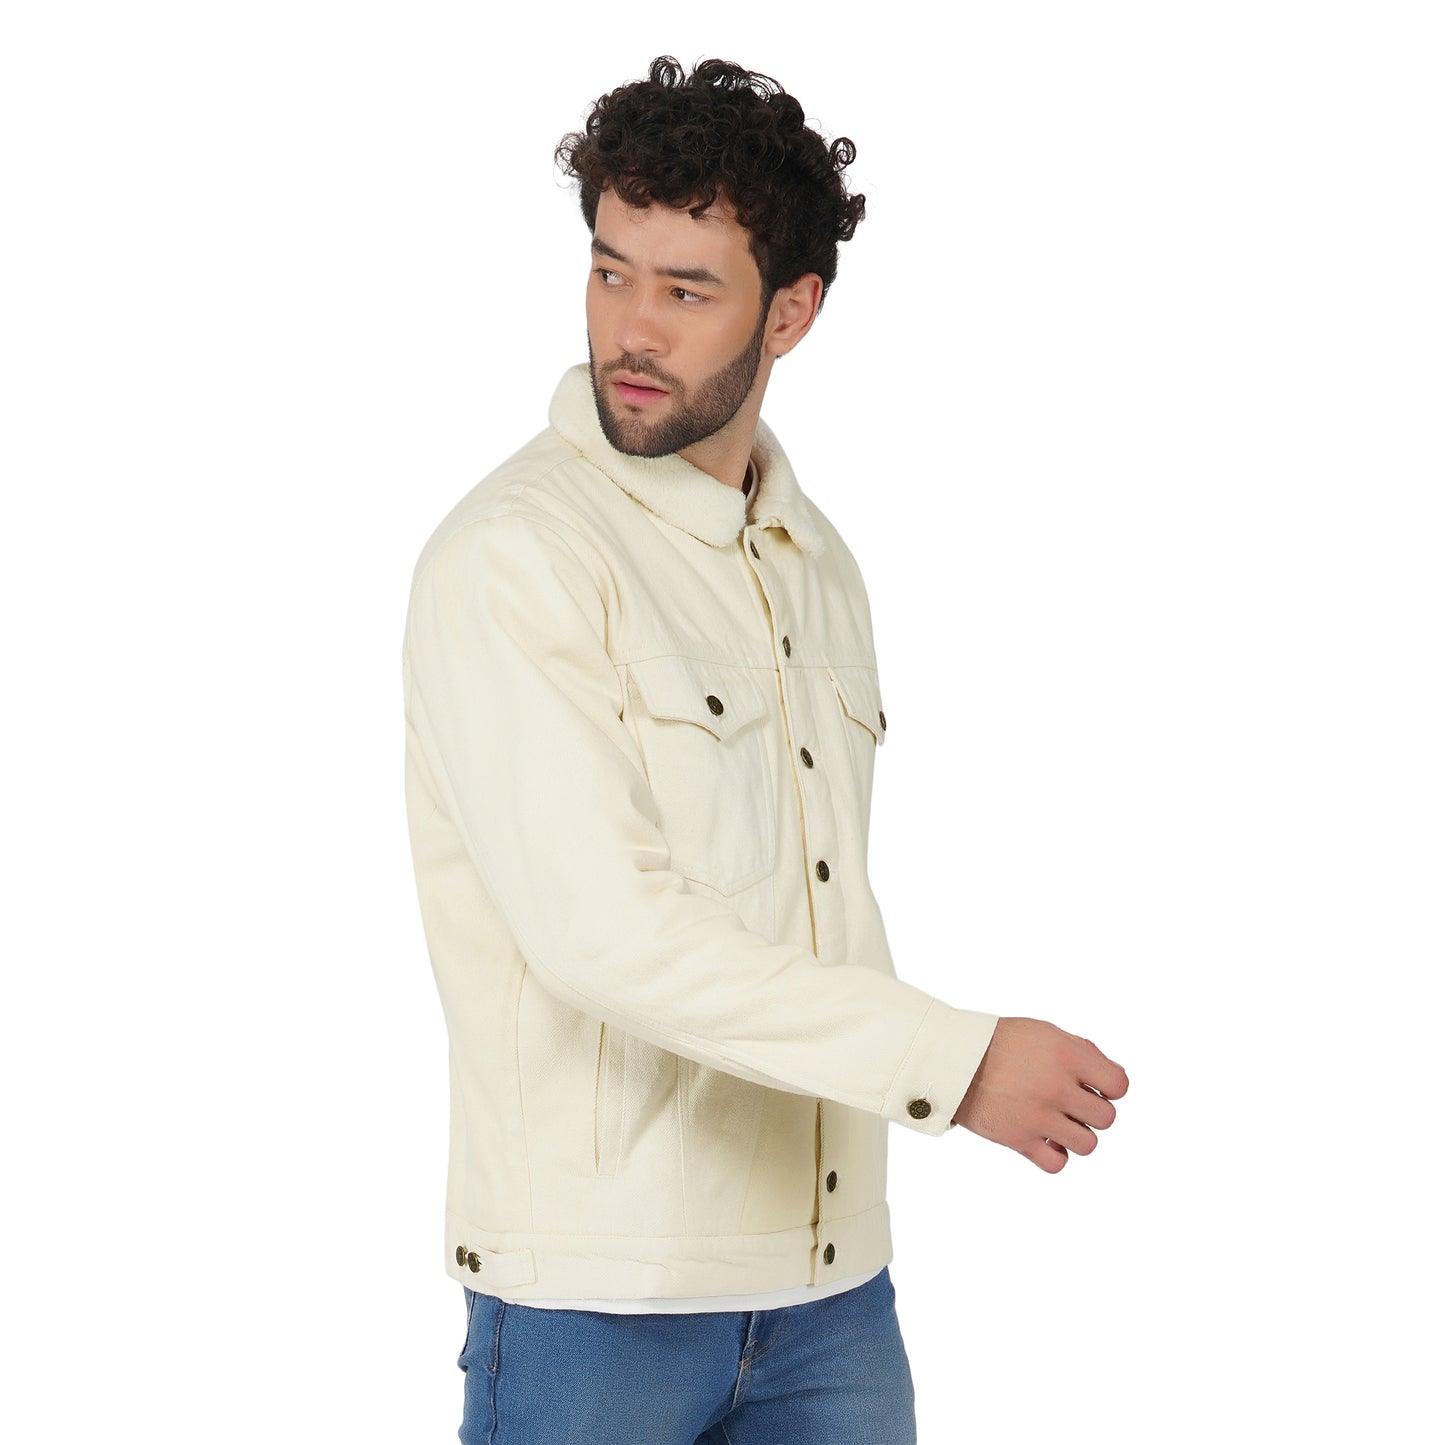 SLAY. Men's Full Sleeves Off-white Solid Button-Down Denim Jacket with Faux-fur Lining-clothing-to-slay.myshopify.com-Jacket